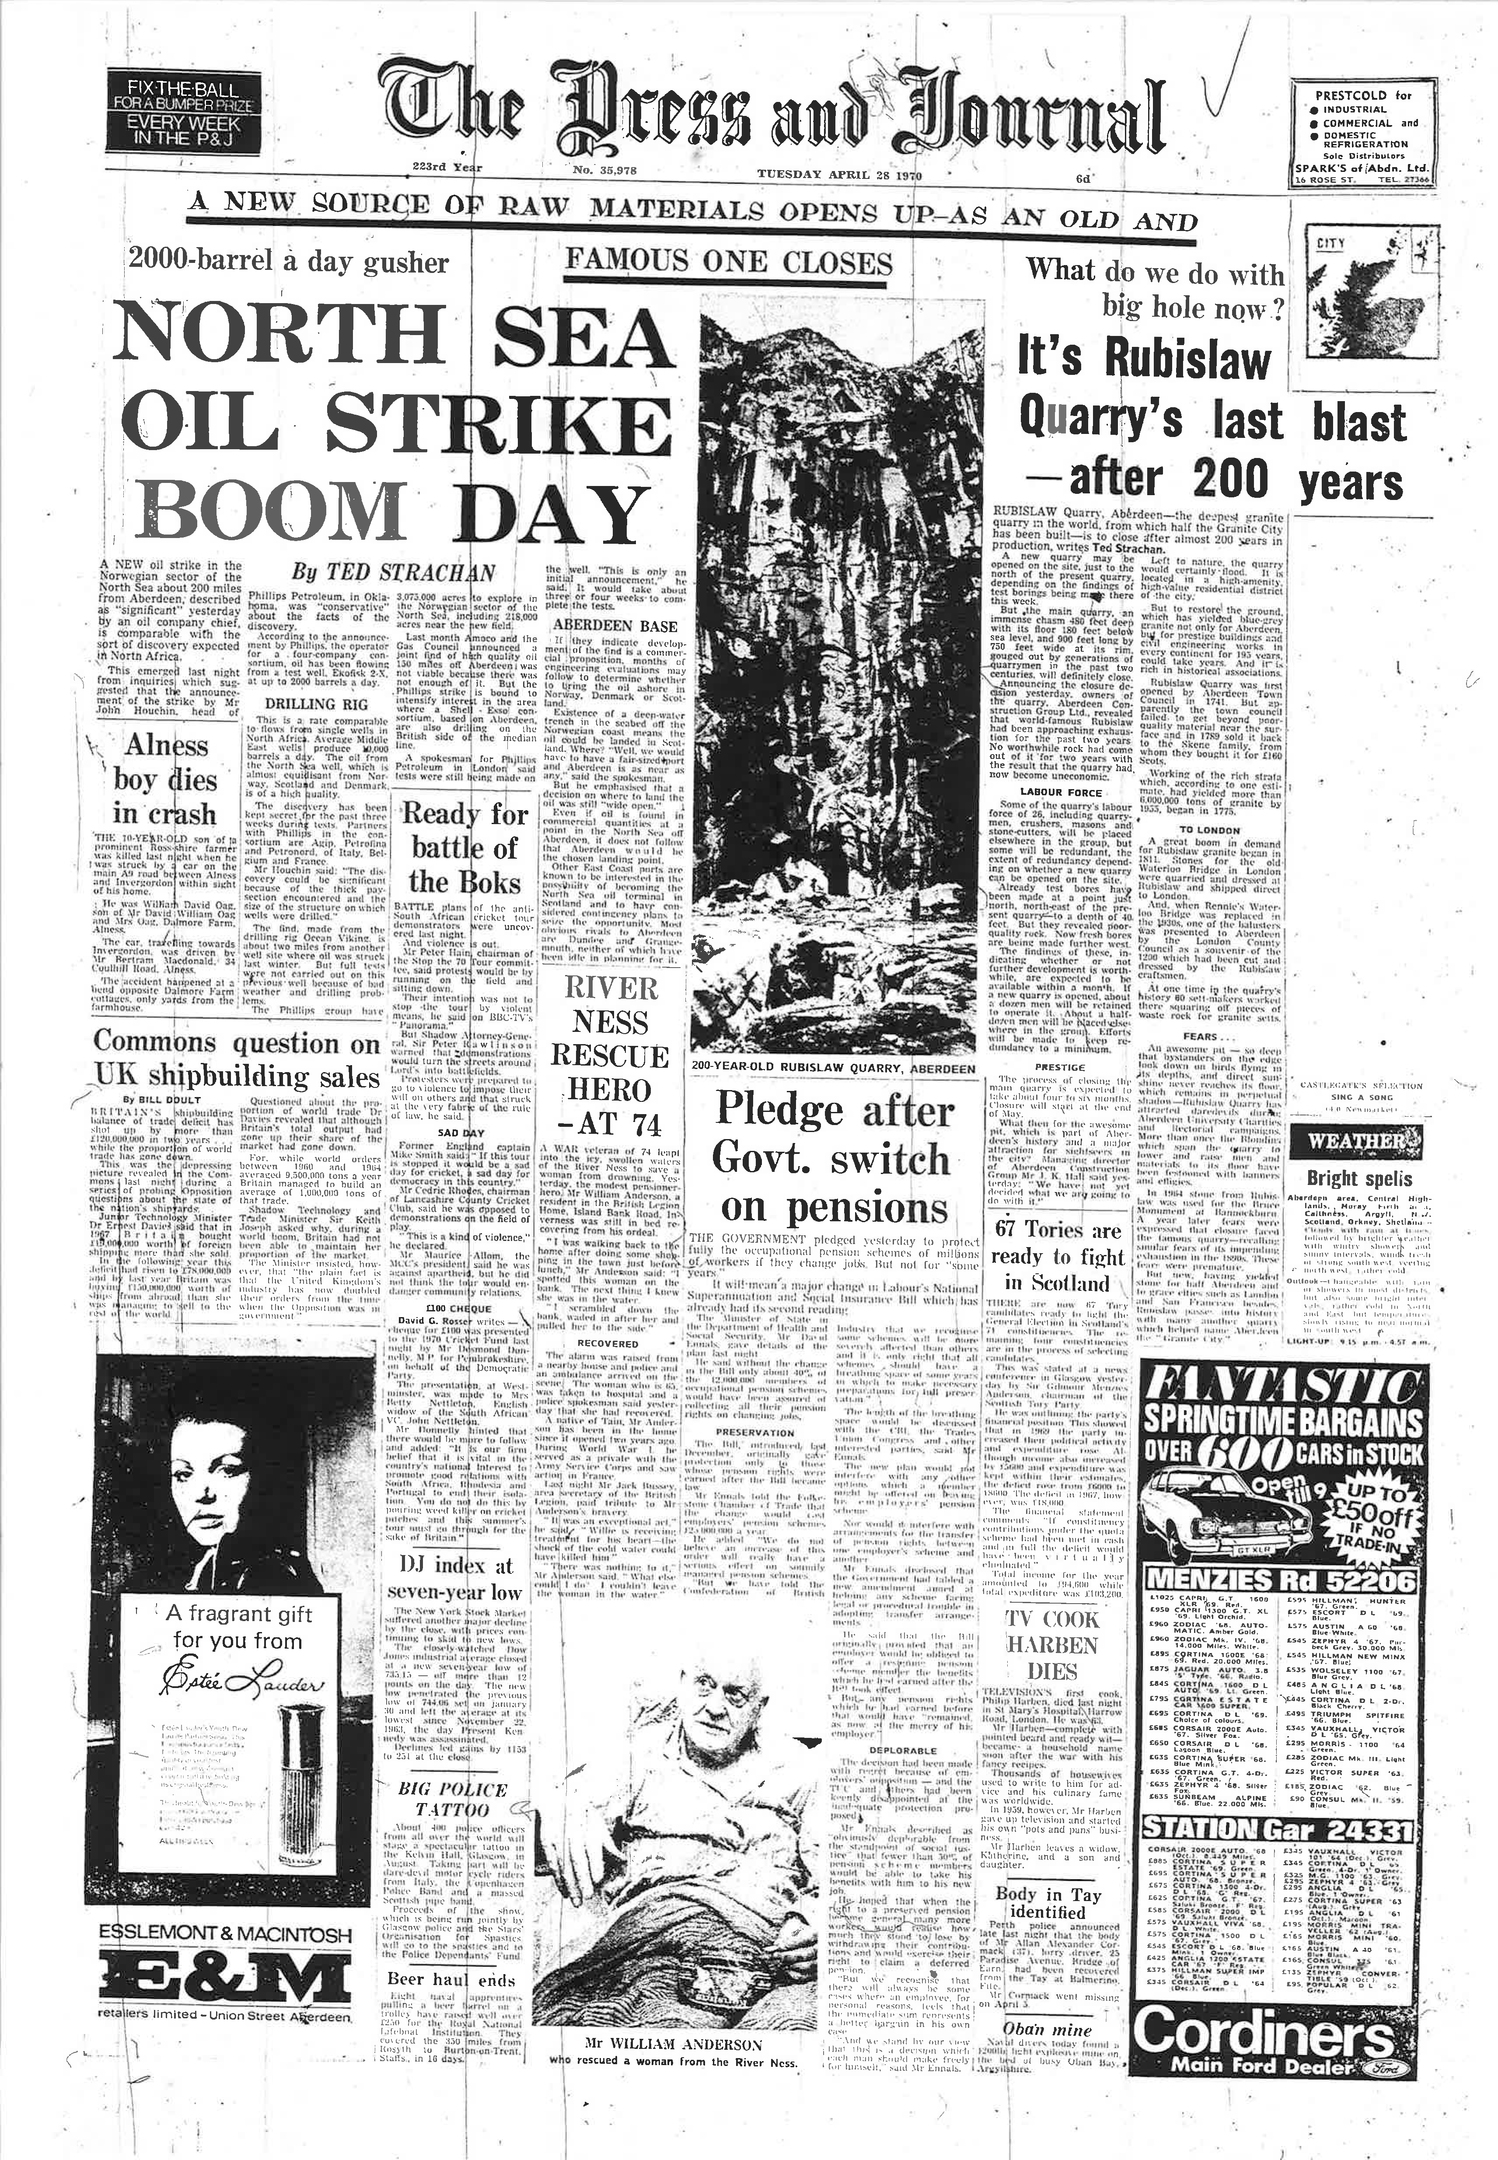 The front page from April, 1970